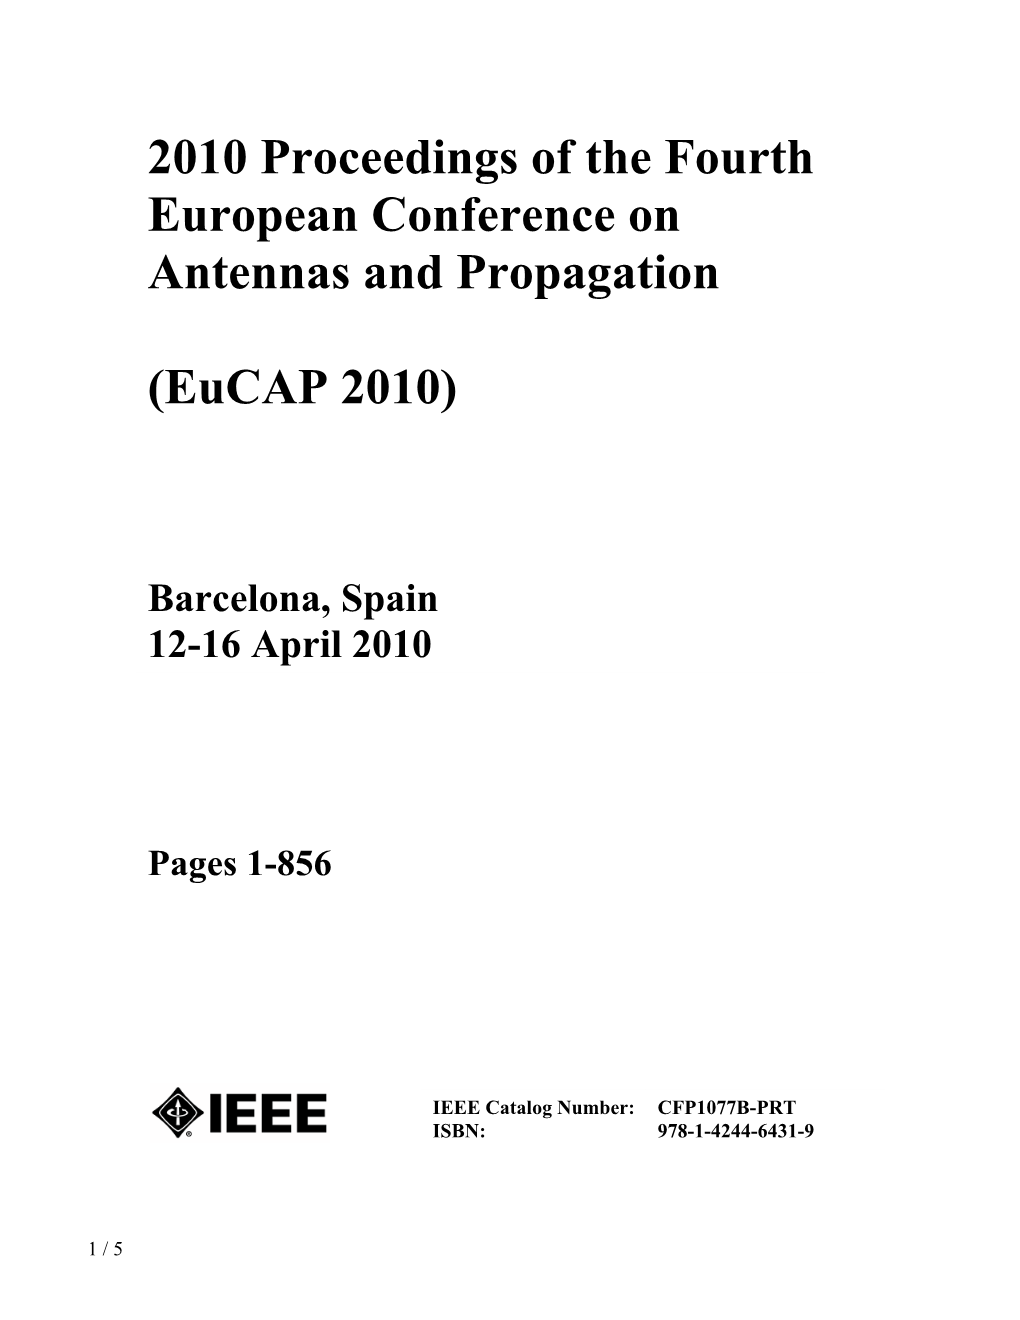 2010 Proceedings of the Fourth European Conference on Antennas and Propagation (Eucap 2010)